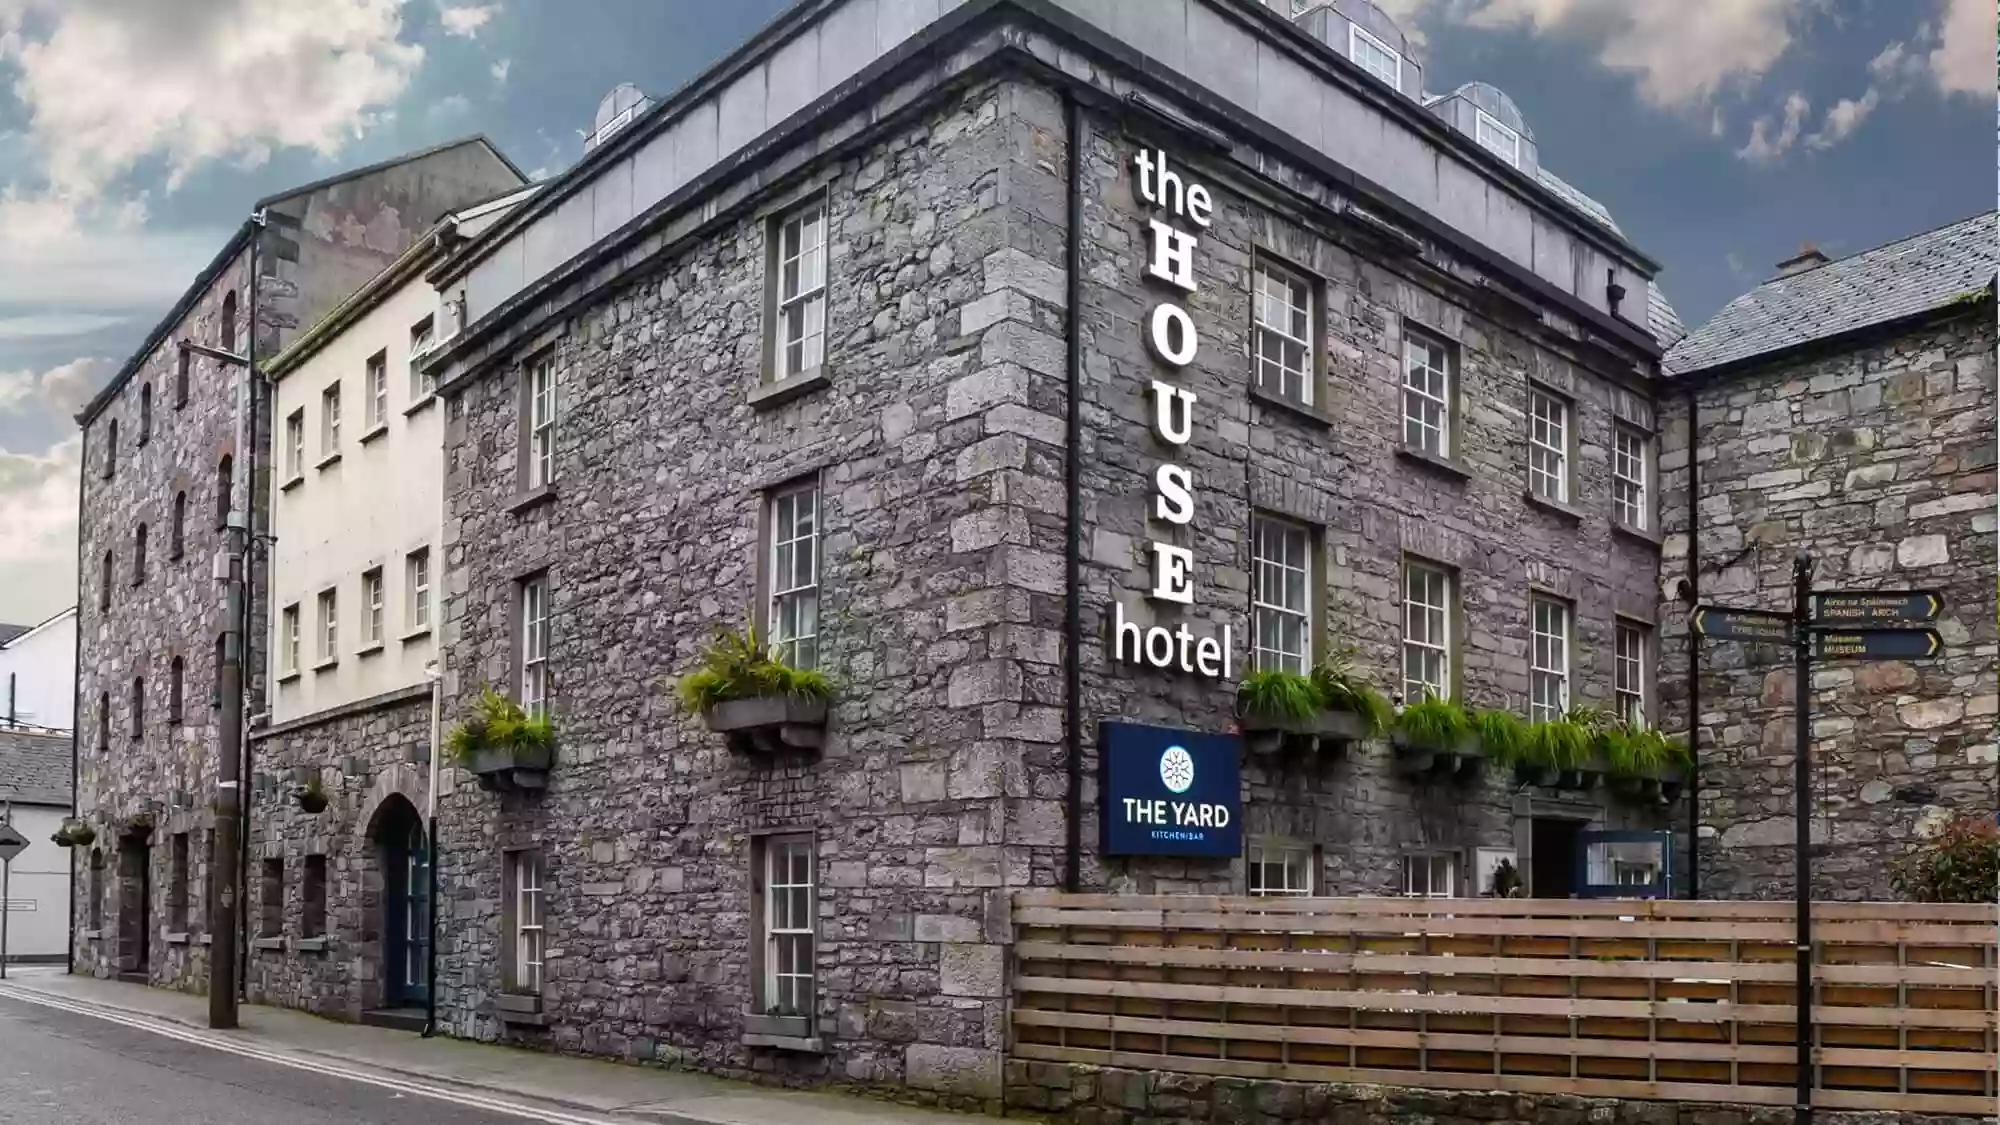 The House Hotel - Galway Hotel